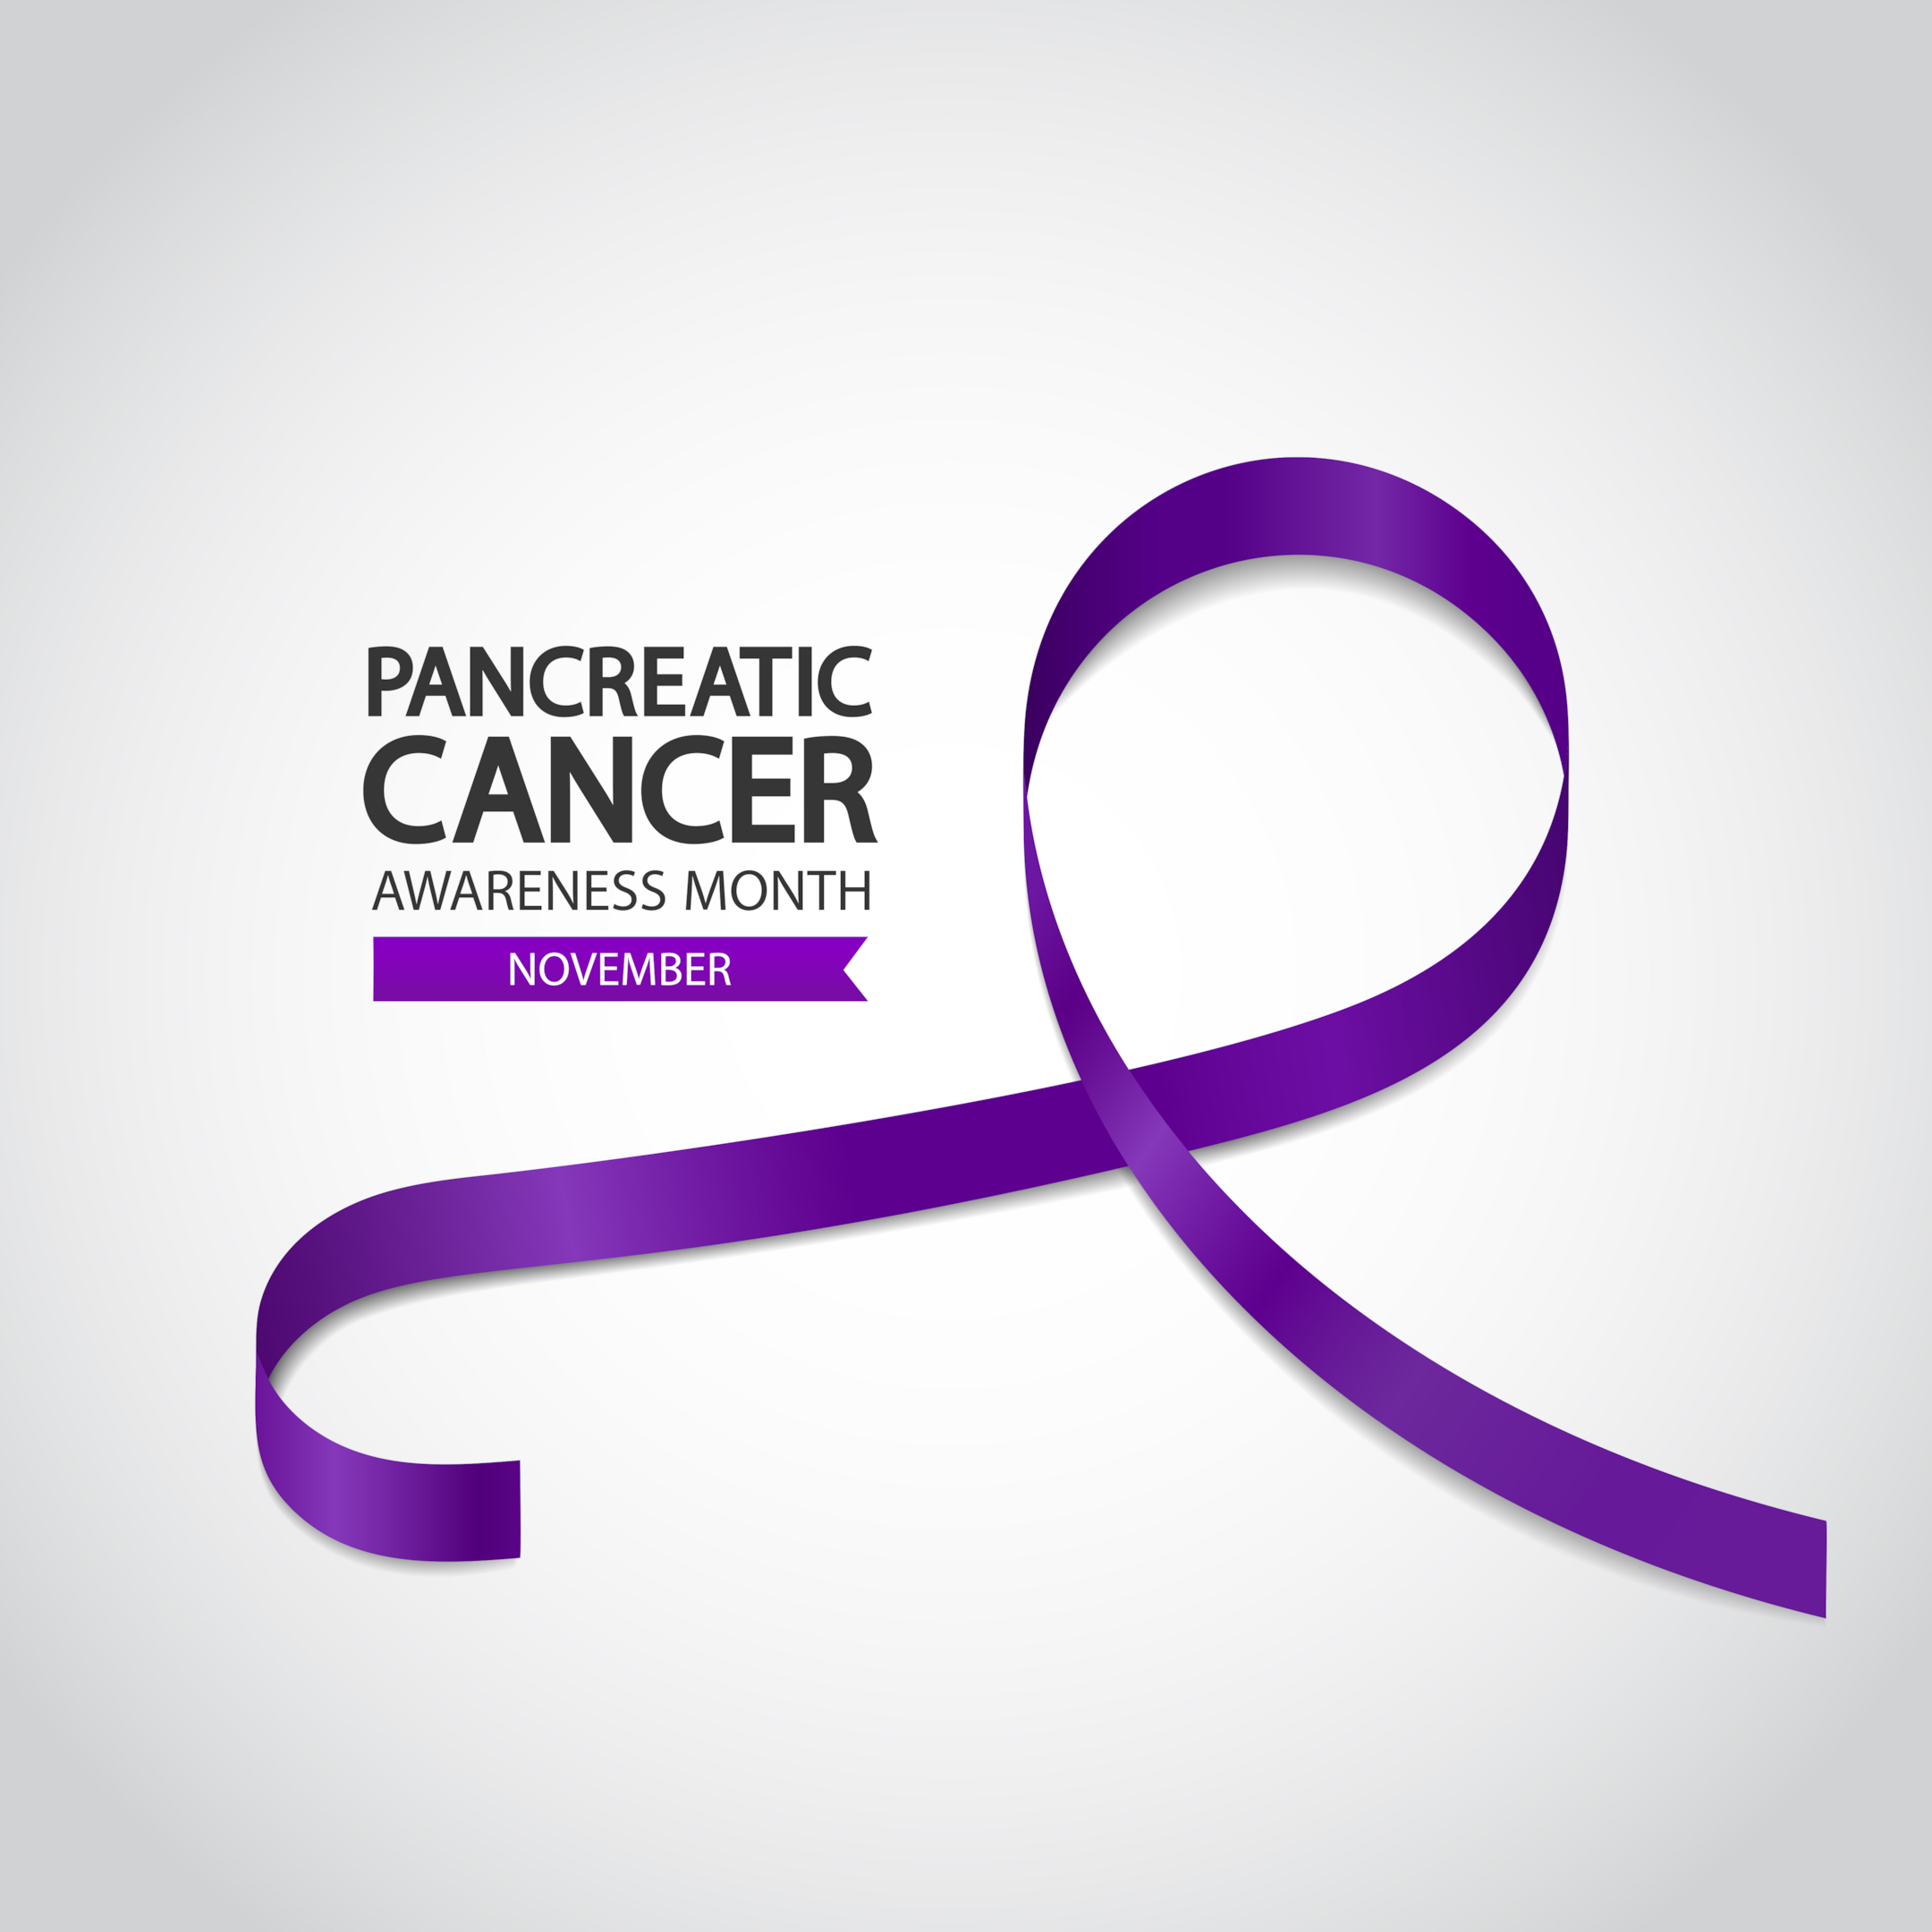 World pancreatic cancer day is celebrated in November to create awareness about the issue.